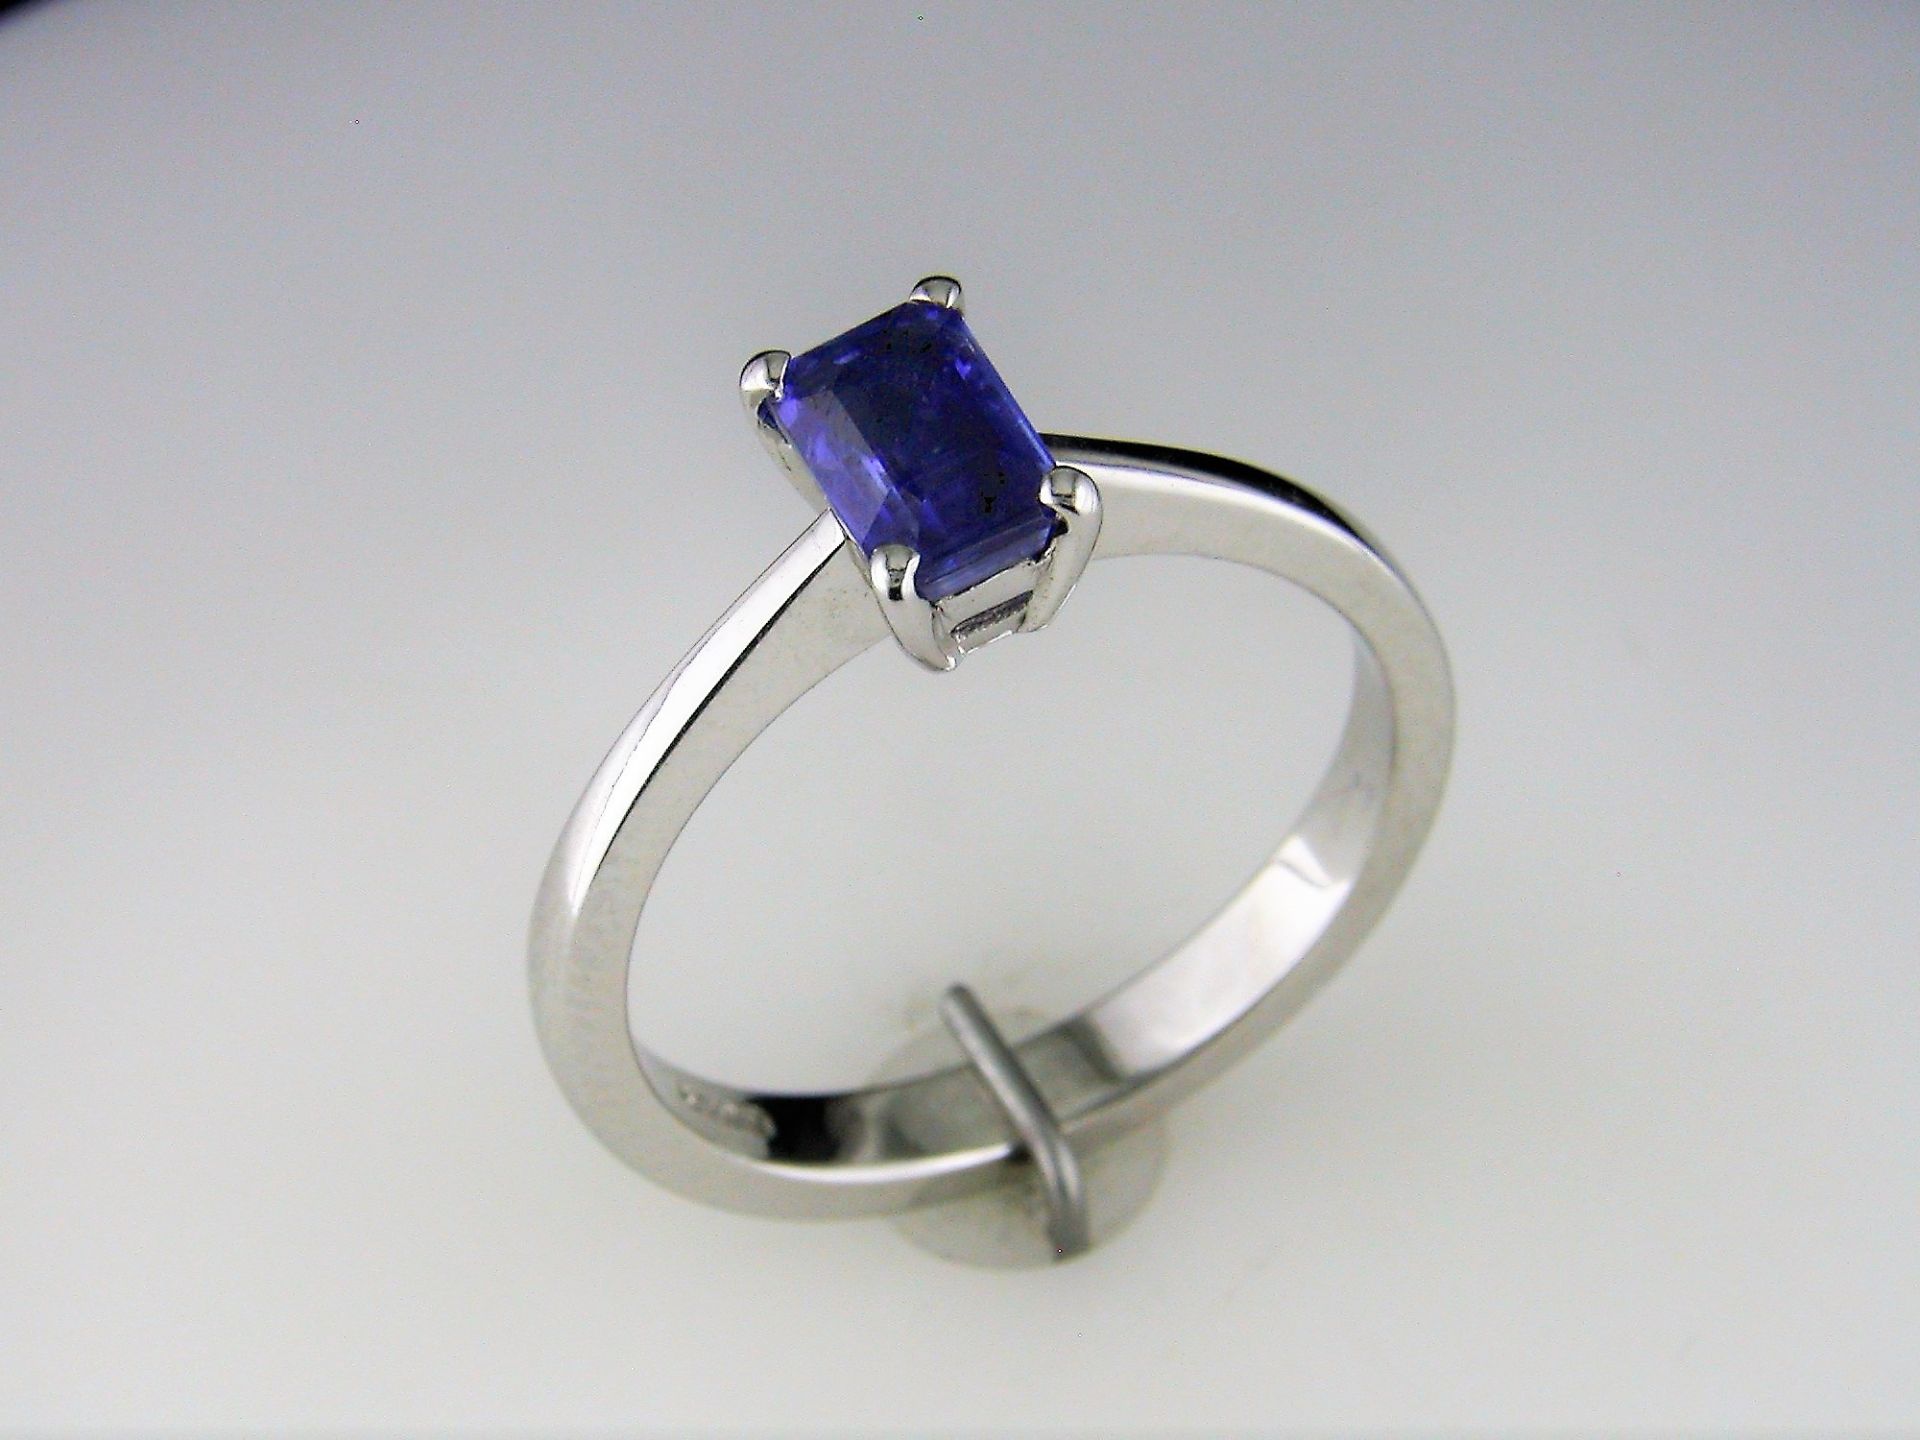 A Solitaire Ring set with a Kyanite Gemstone in an Emerald Cut